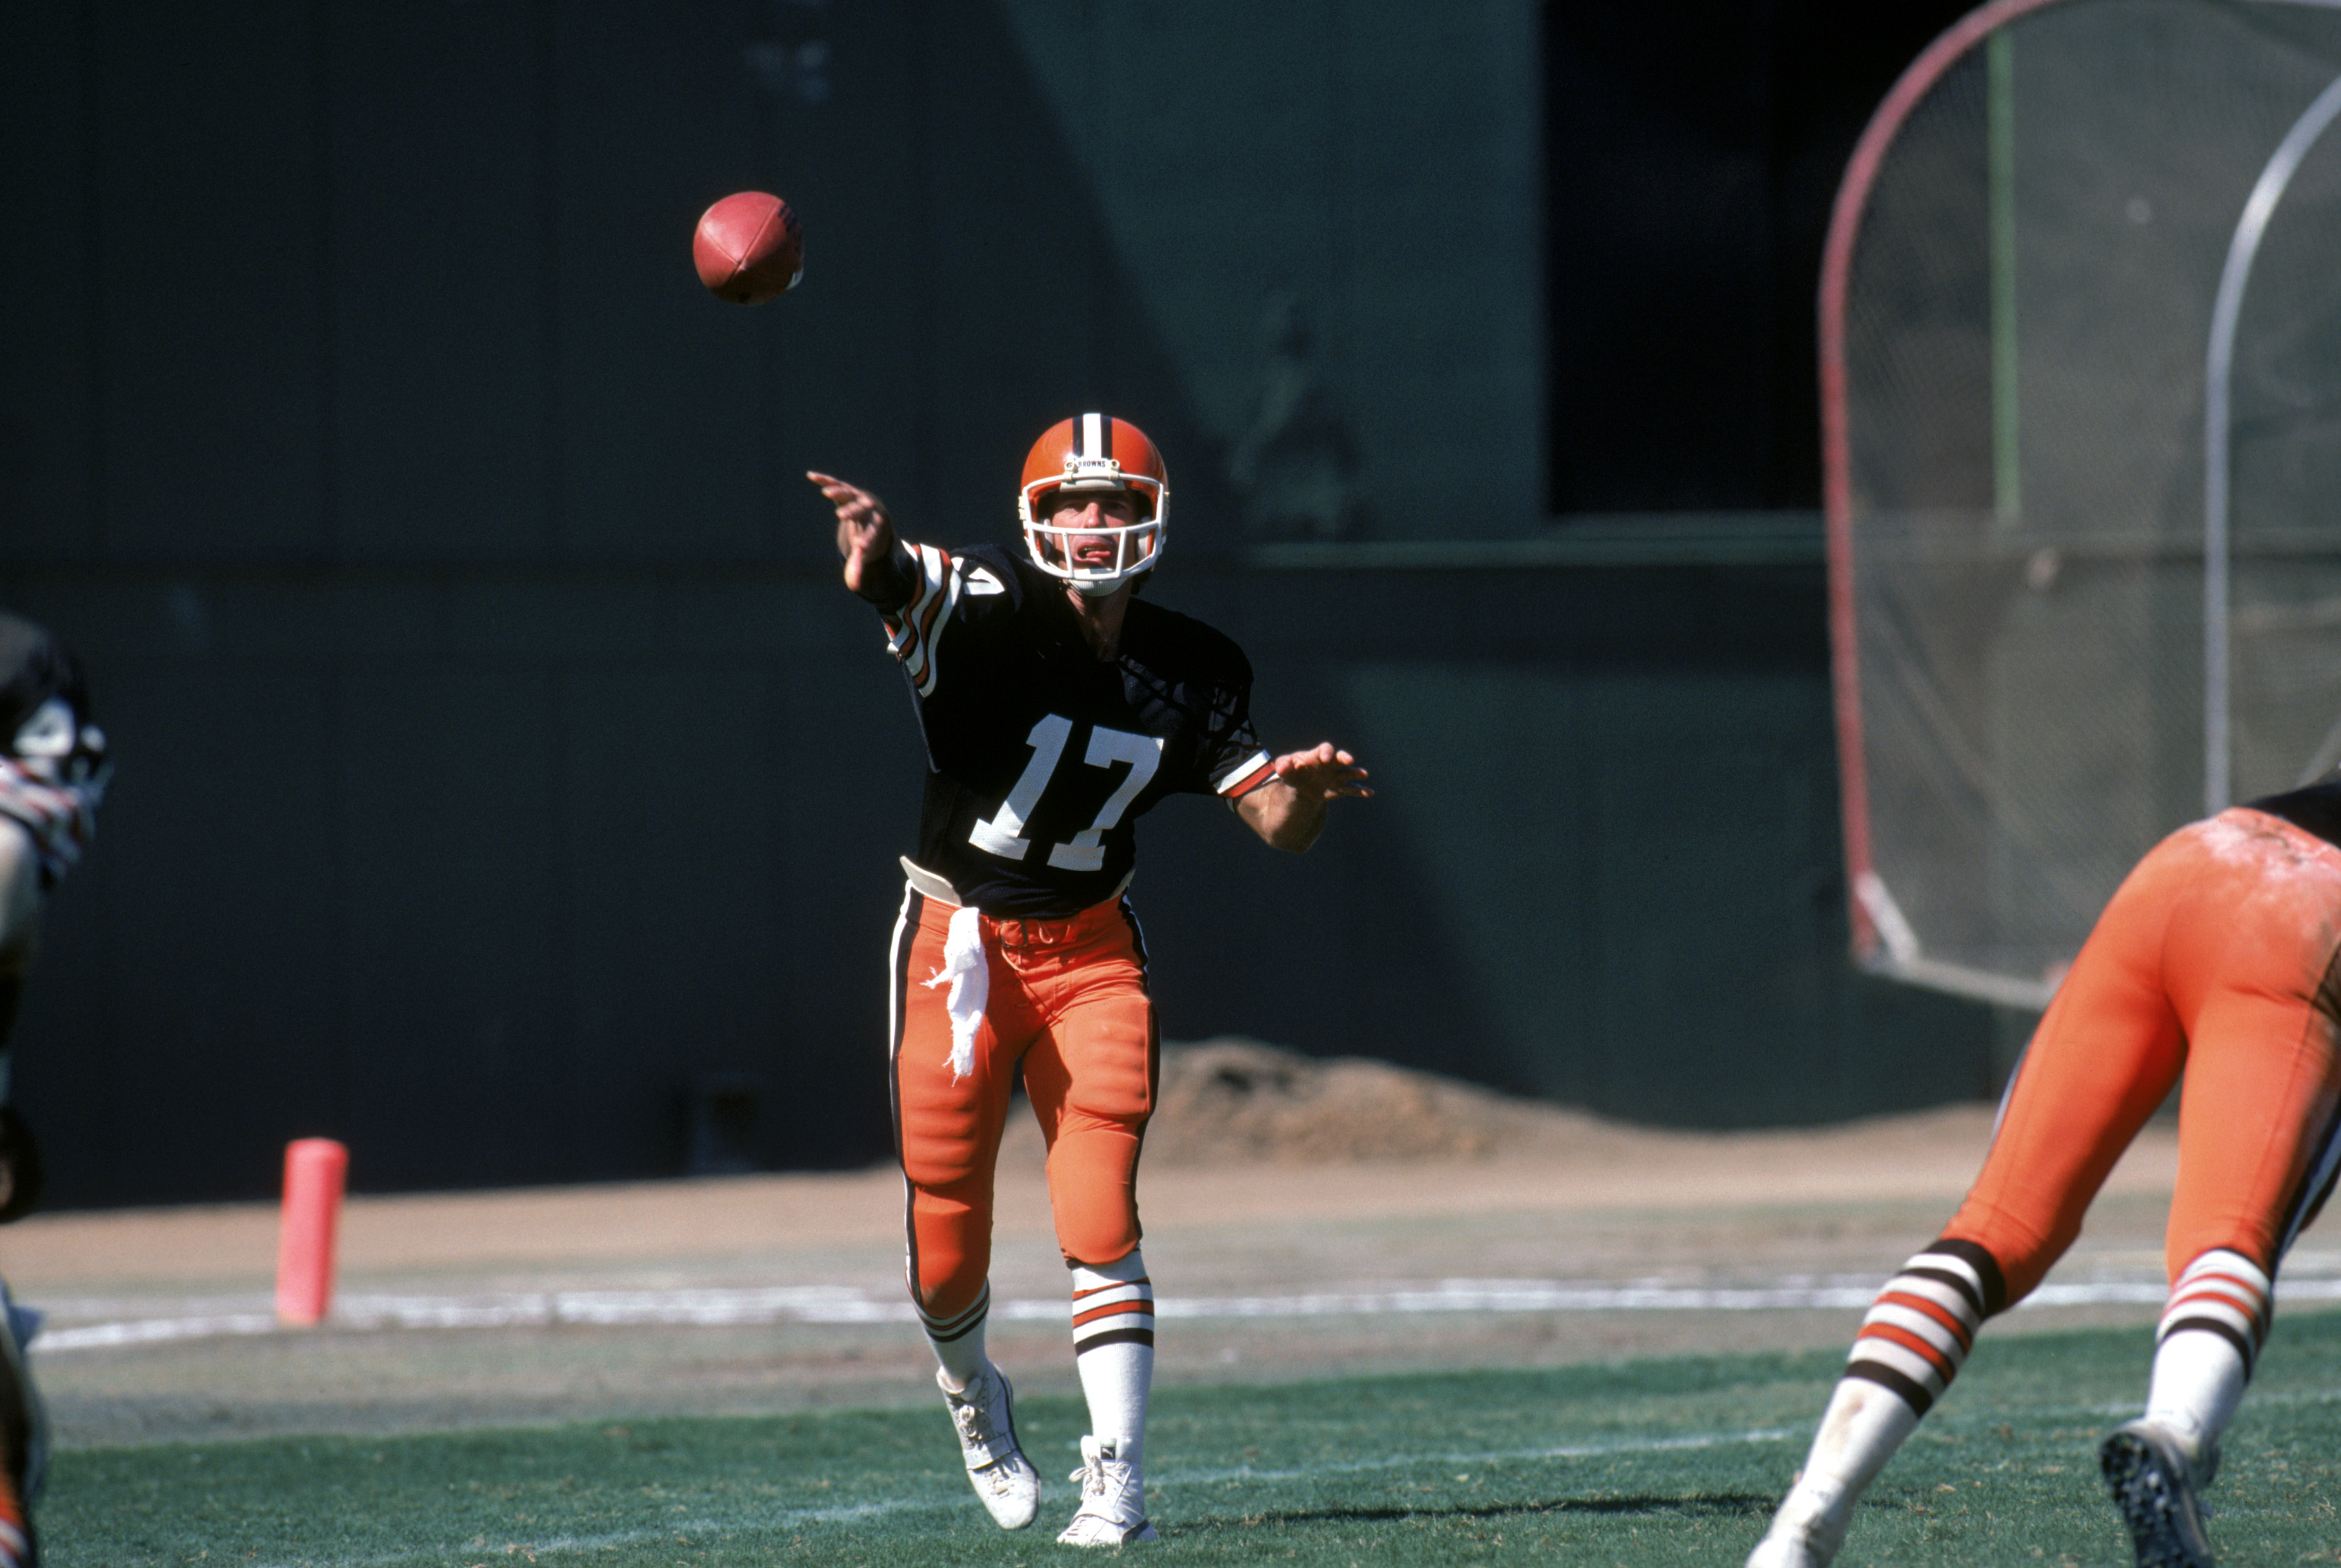 SAN DIEGO - SEPTEMBER 25:  Quarterback Brian Sipe #17 of the Cleveland Browns throws a pass during a game against the San Diego Chargers at Jack Murphy on September 25, 1983 in San Diego, California.  The Browns won 30-24 in overtime. (Photo by George Ros